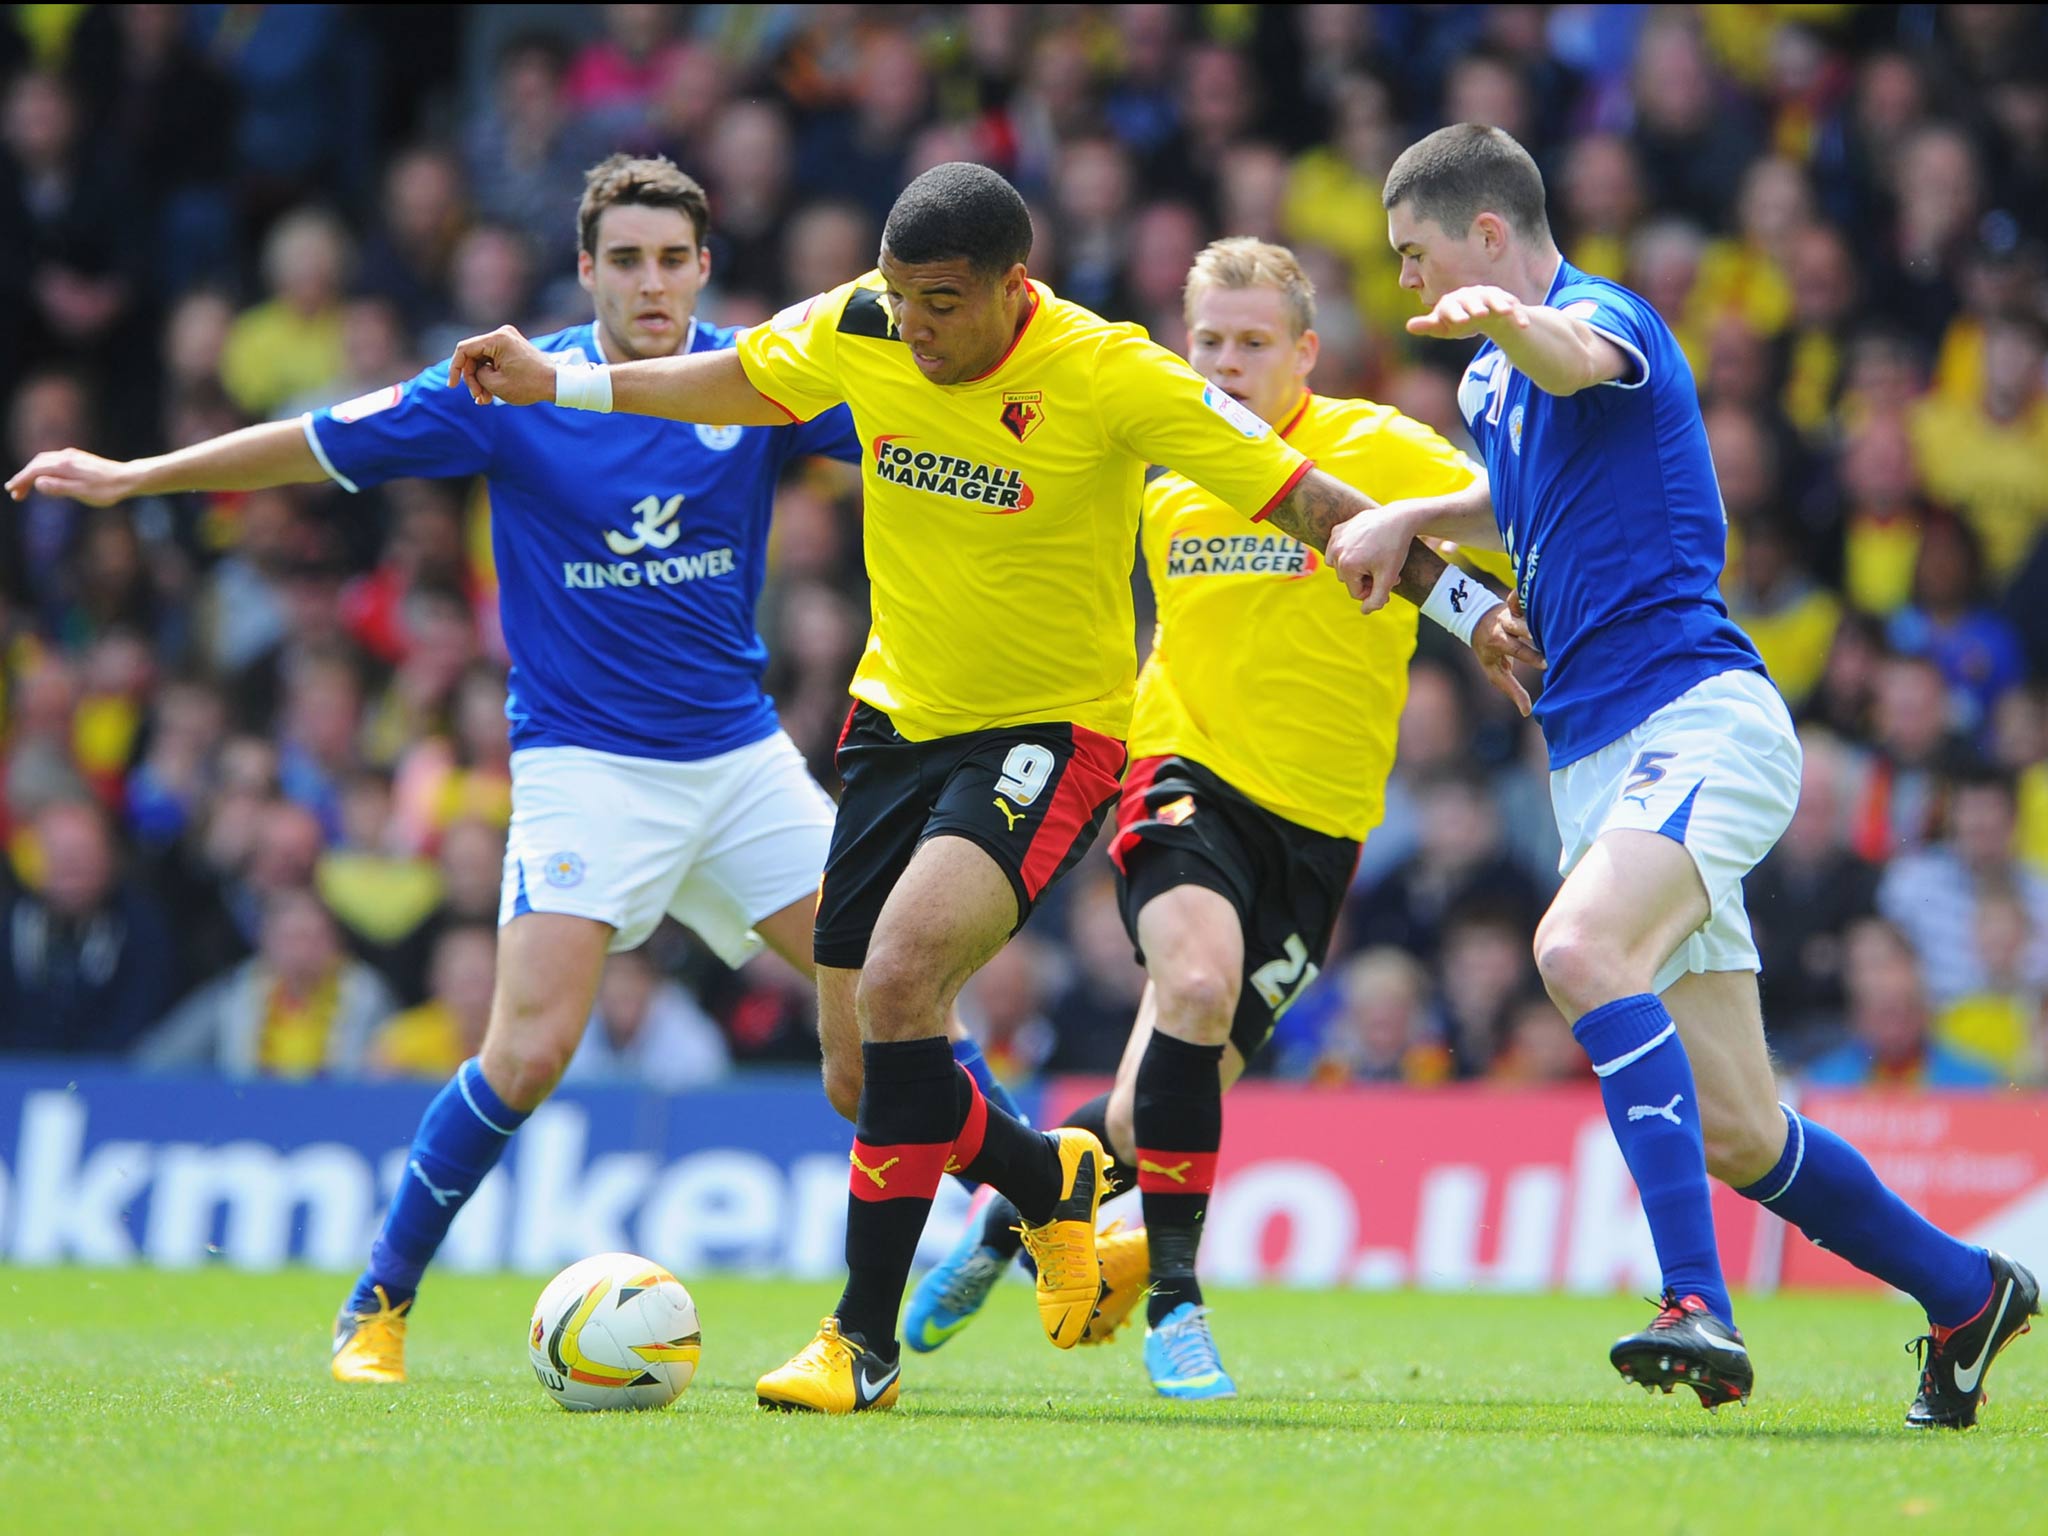 Troy Deeney scored a late winner to send Watford through to the Championship play-off finals